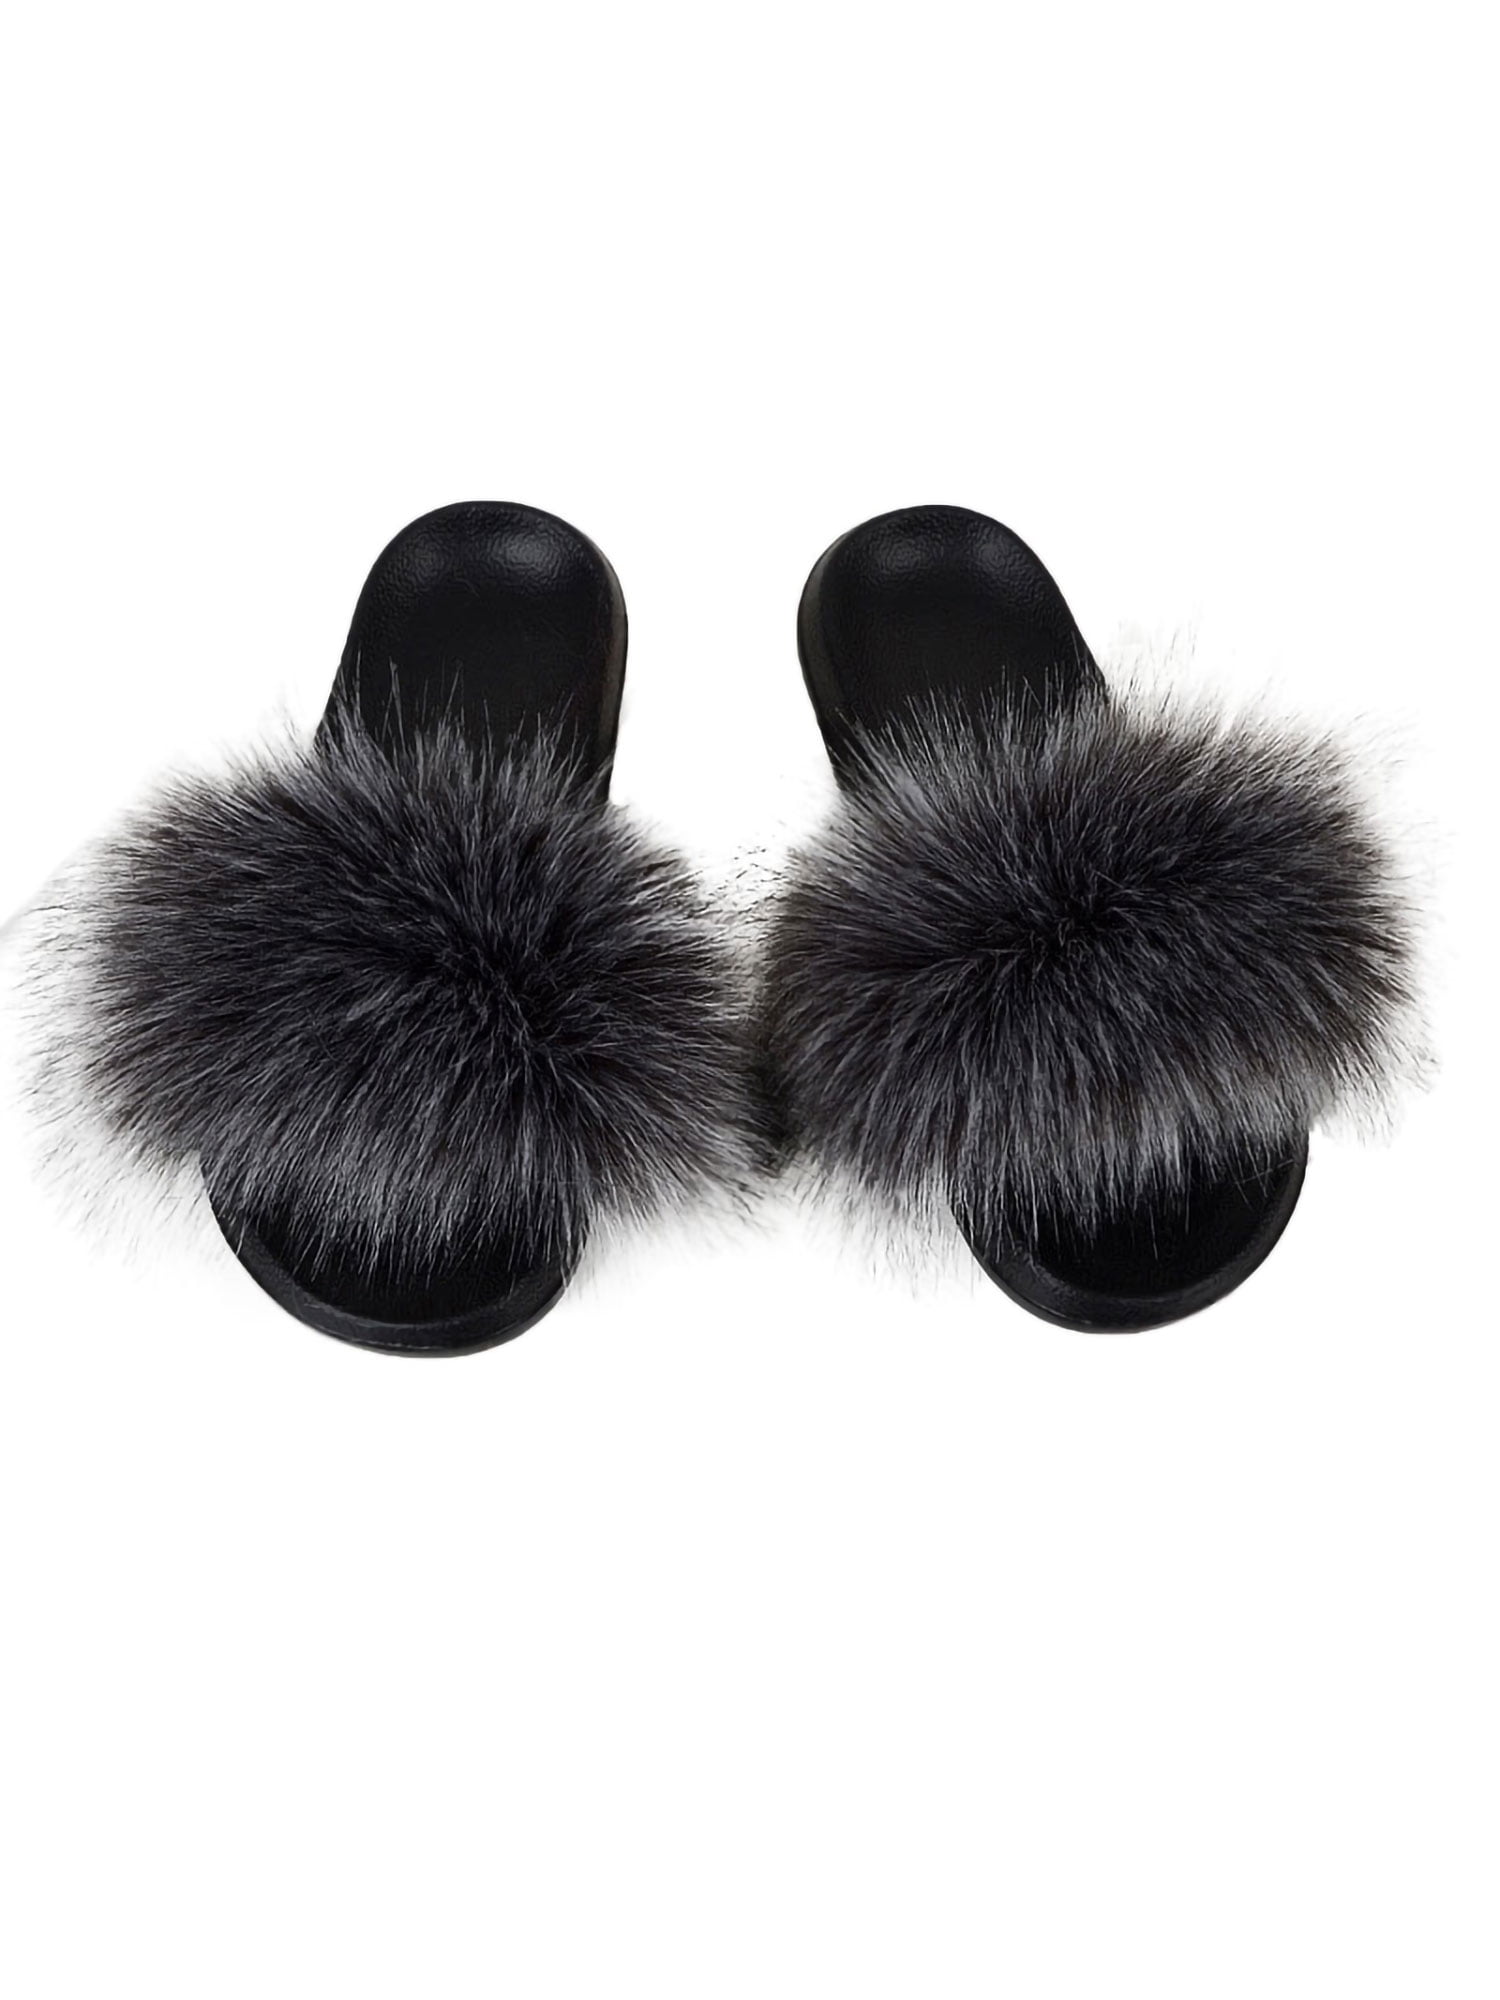 Womens Sliders Luxury Faux Fox Fur Indoor Outdoor Slides Slippers Sandals Shoes